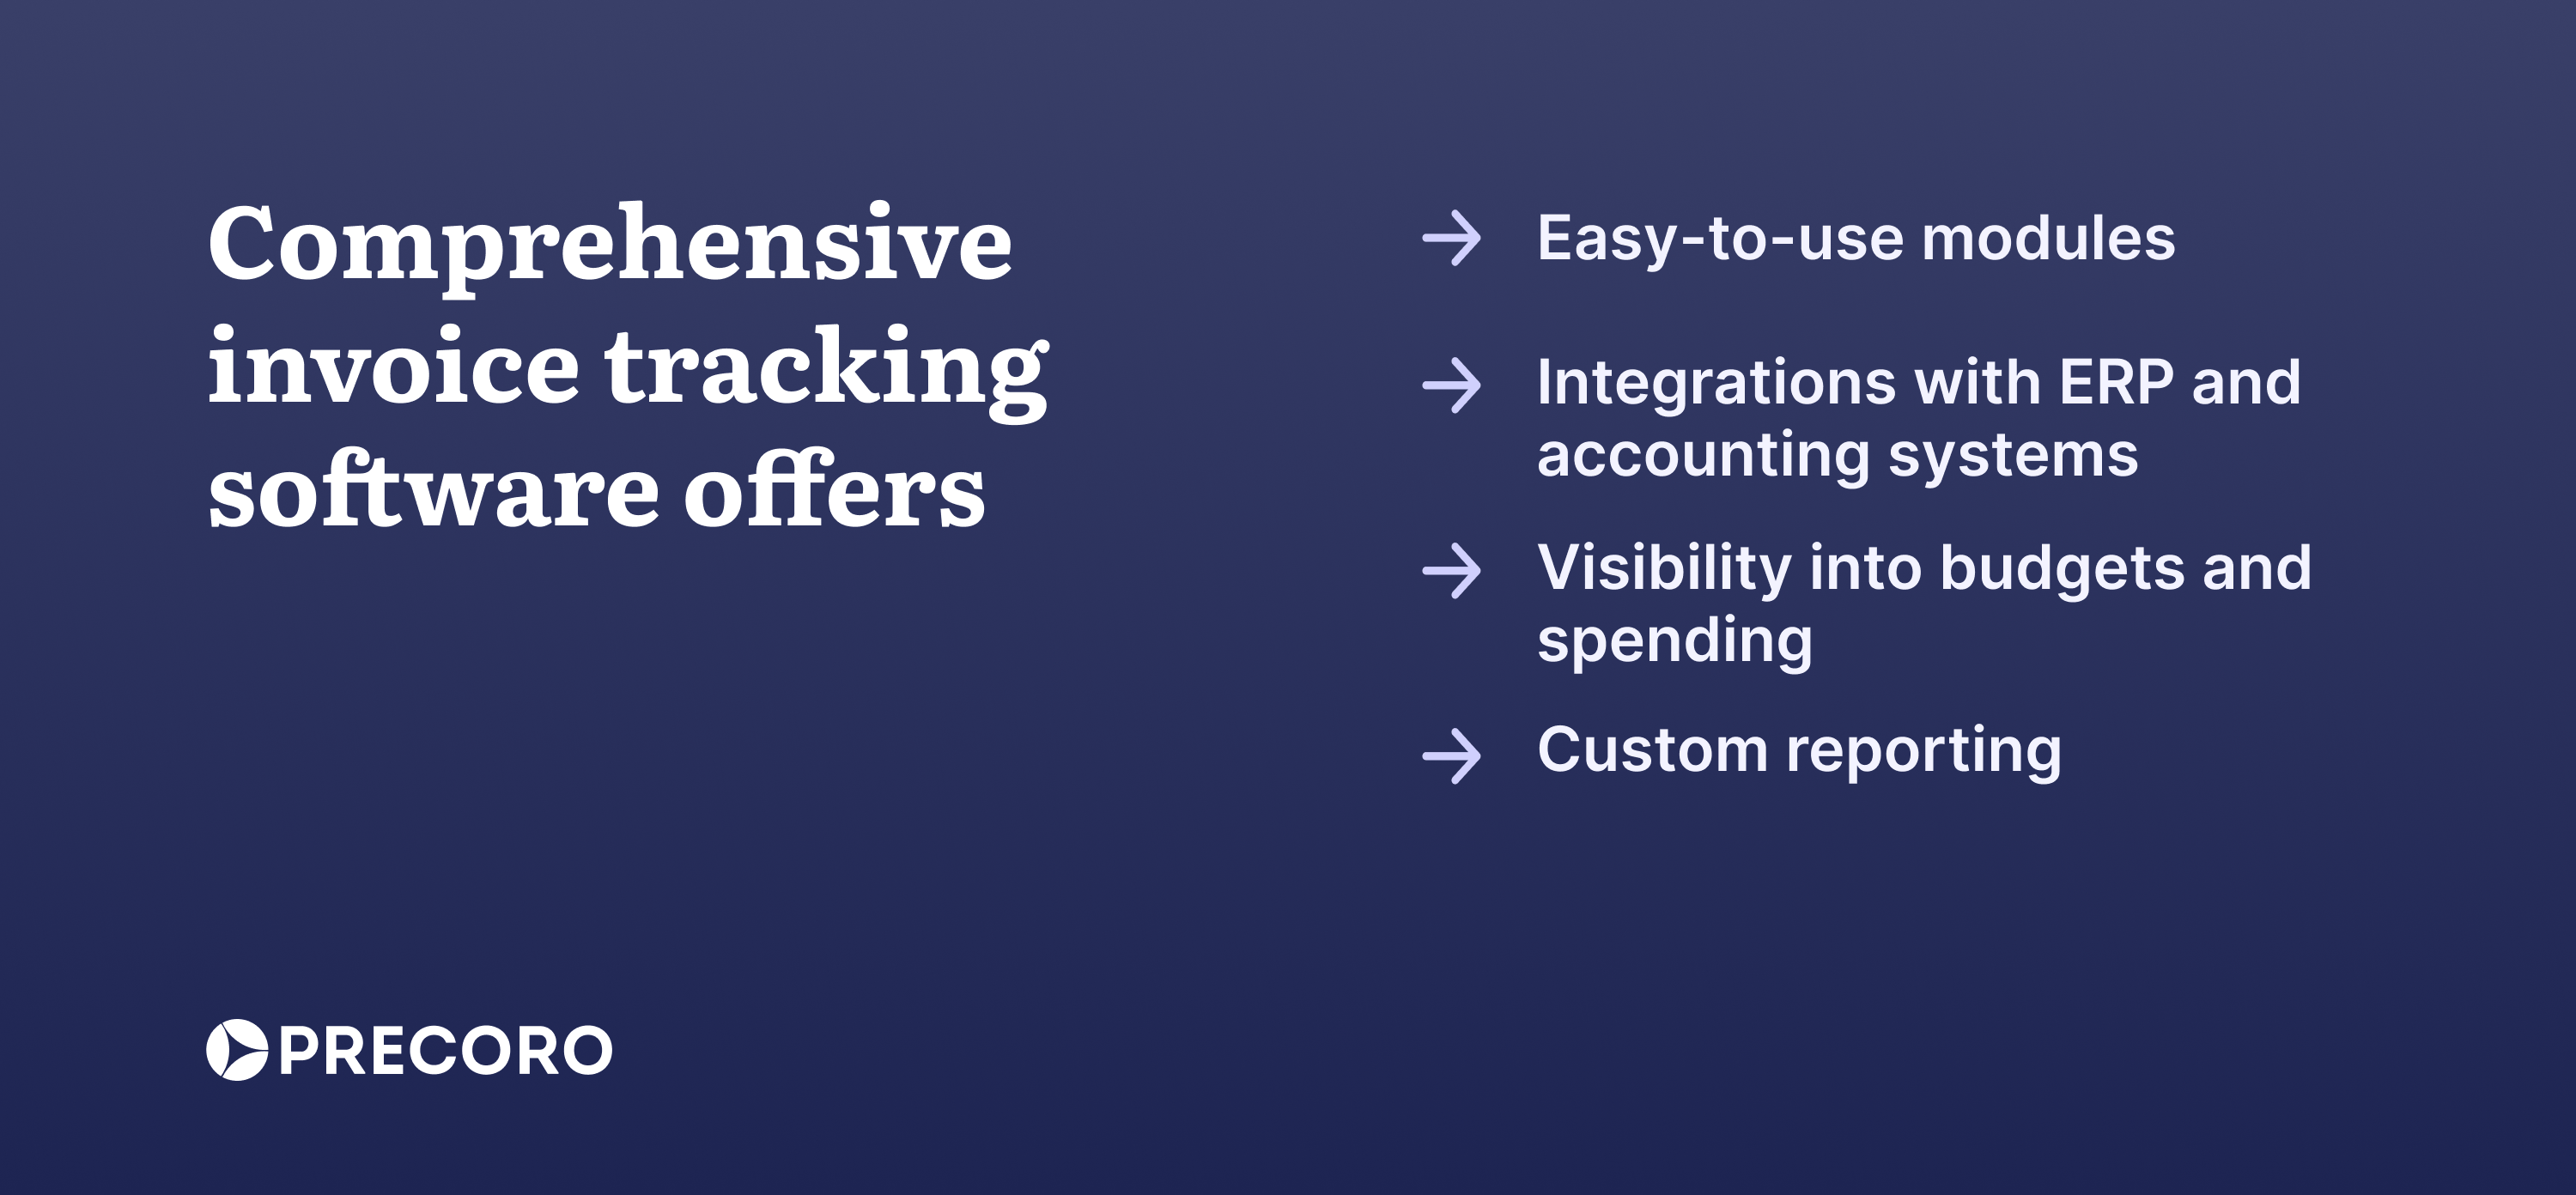 the attributes of a comprehensive invoice tracking system